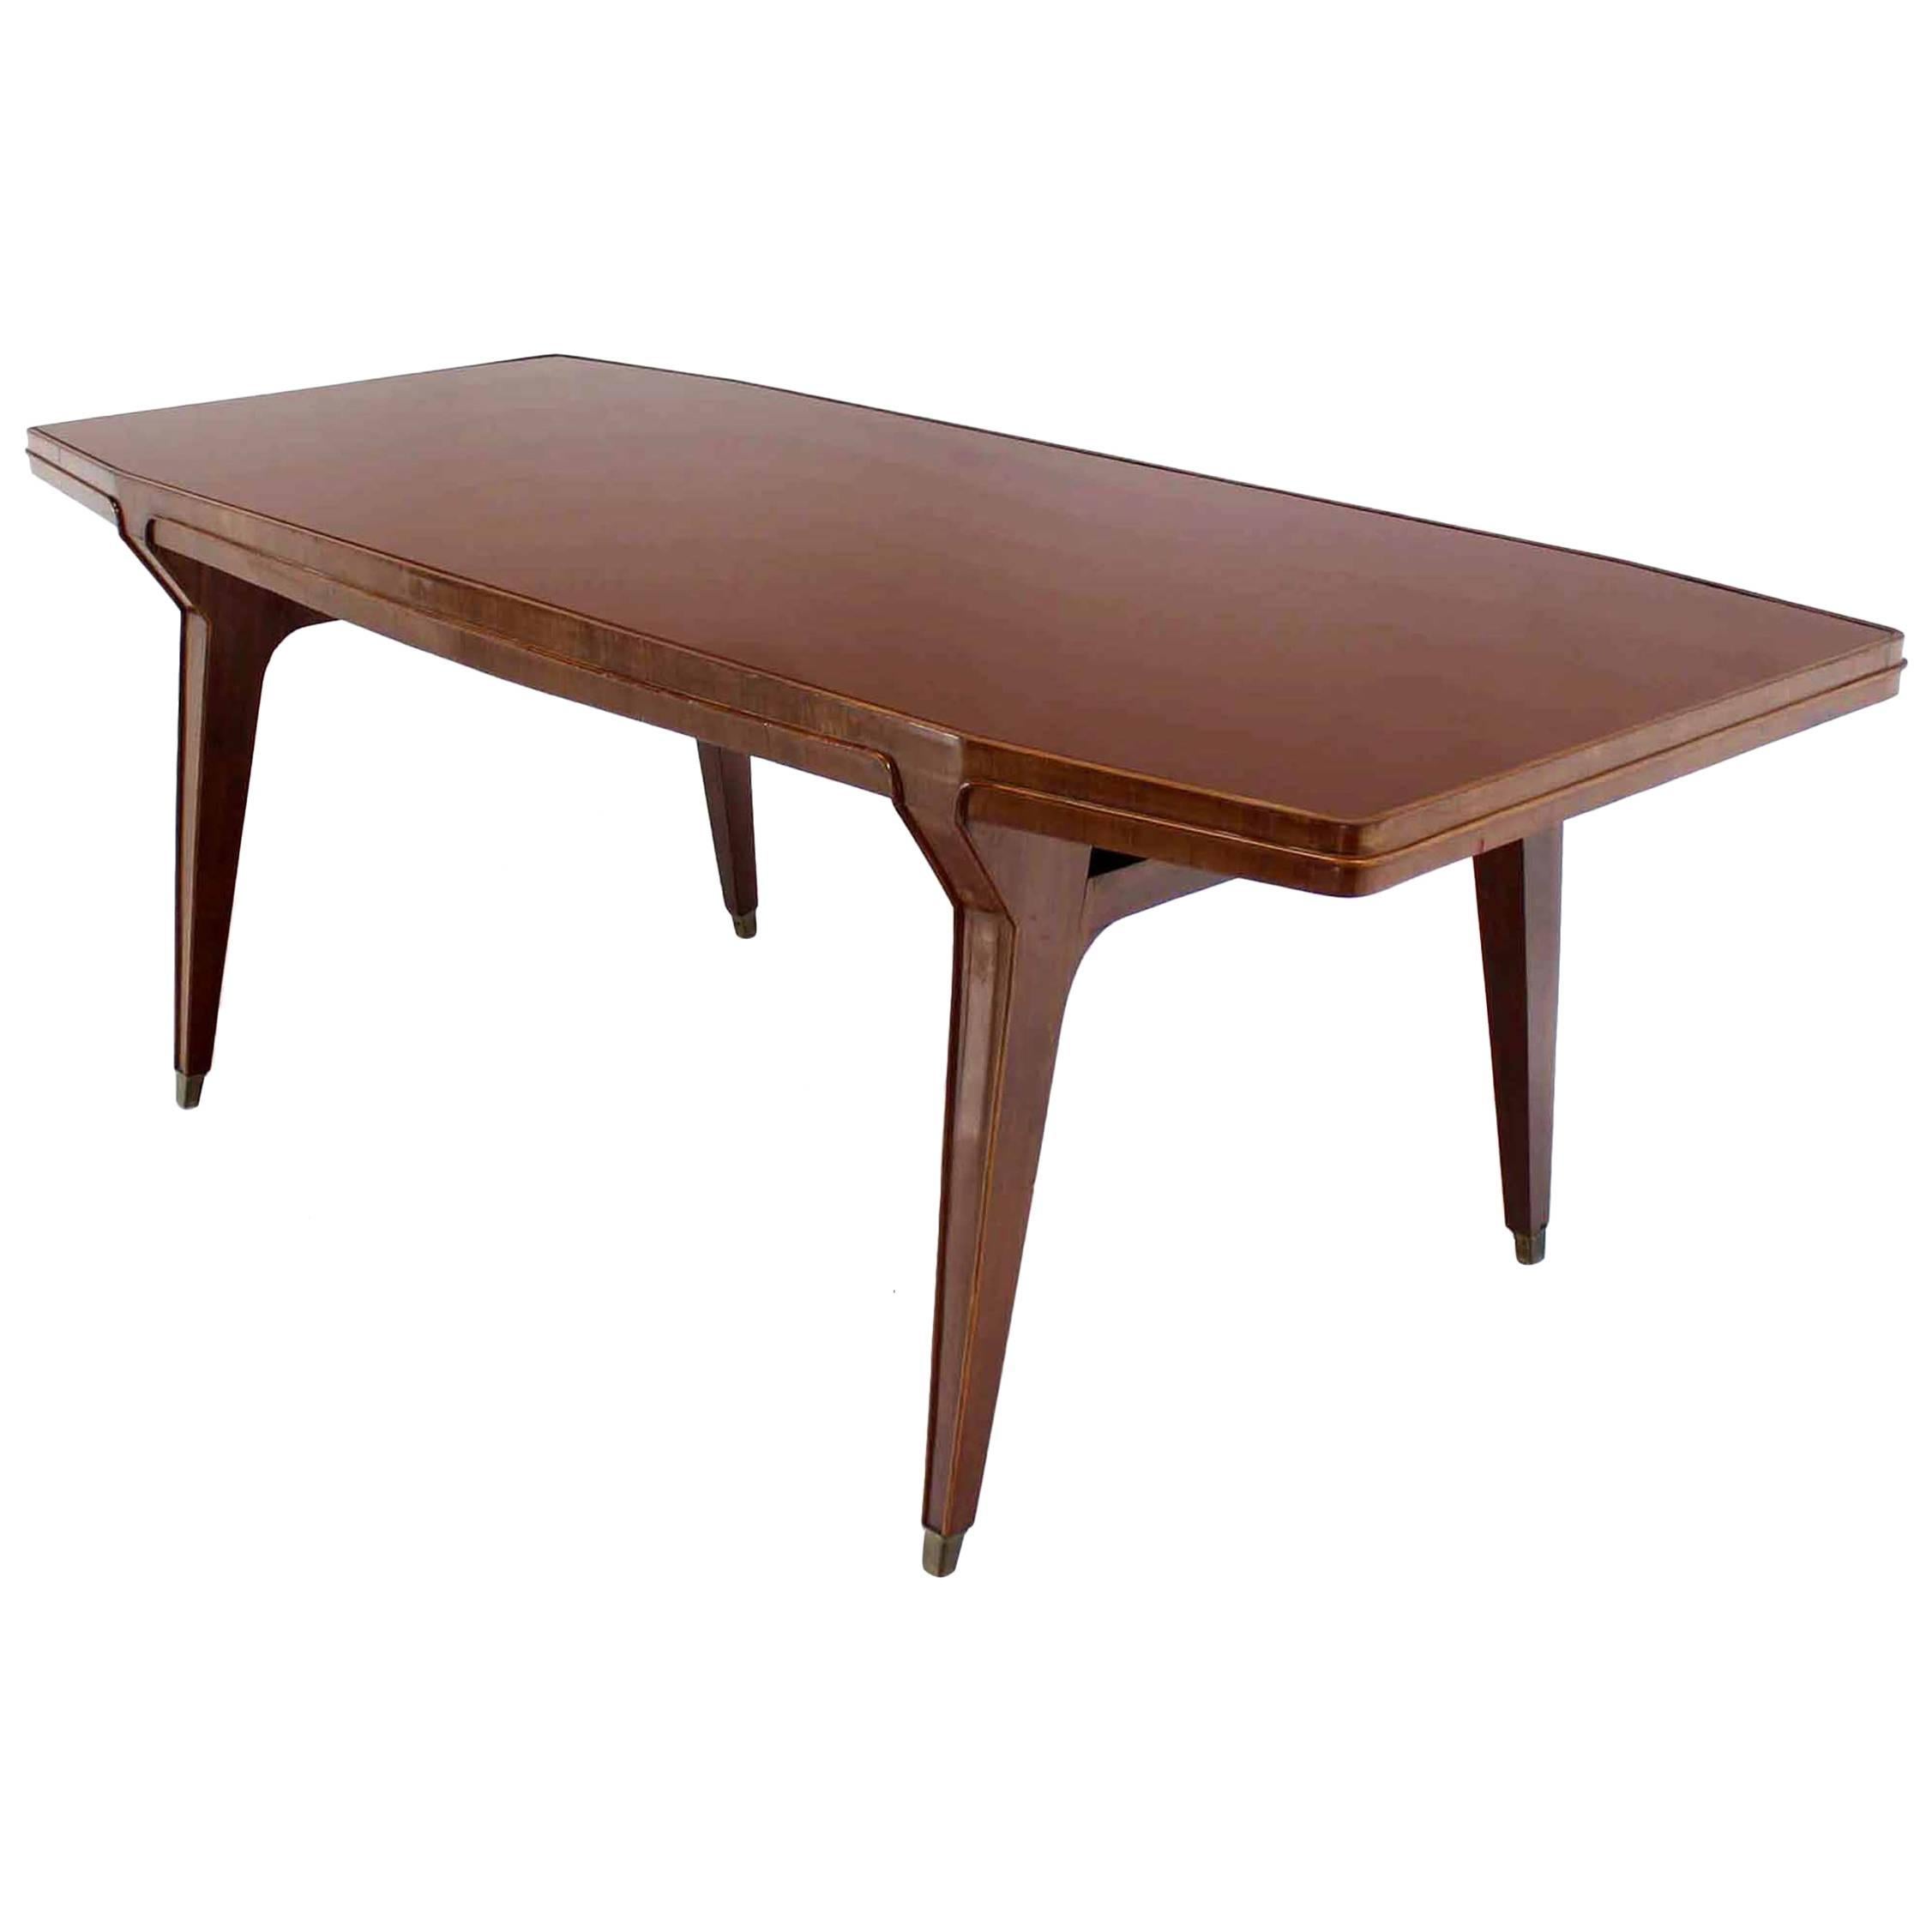 Large Italian Modern Walnut Dining Conference Tapered Legs Table Boat Shape For Sale